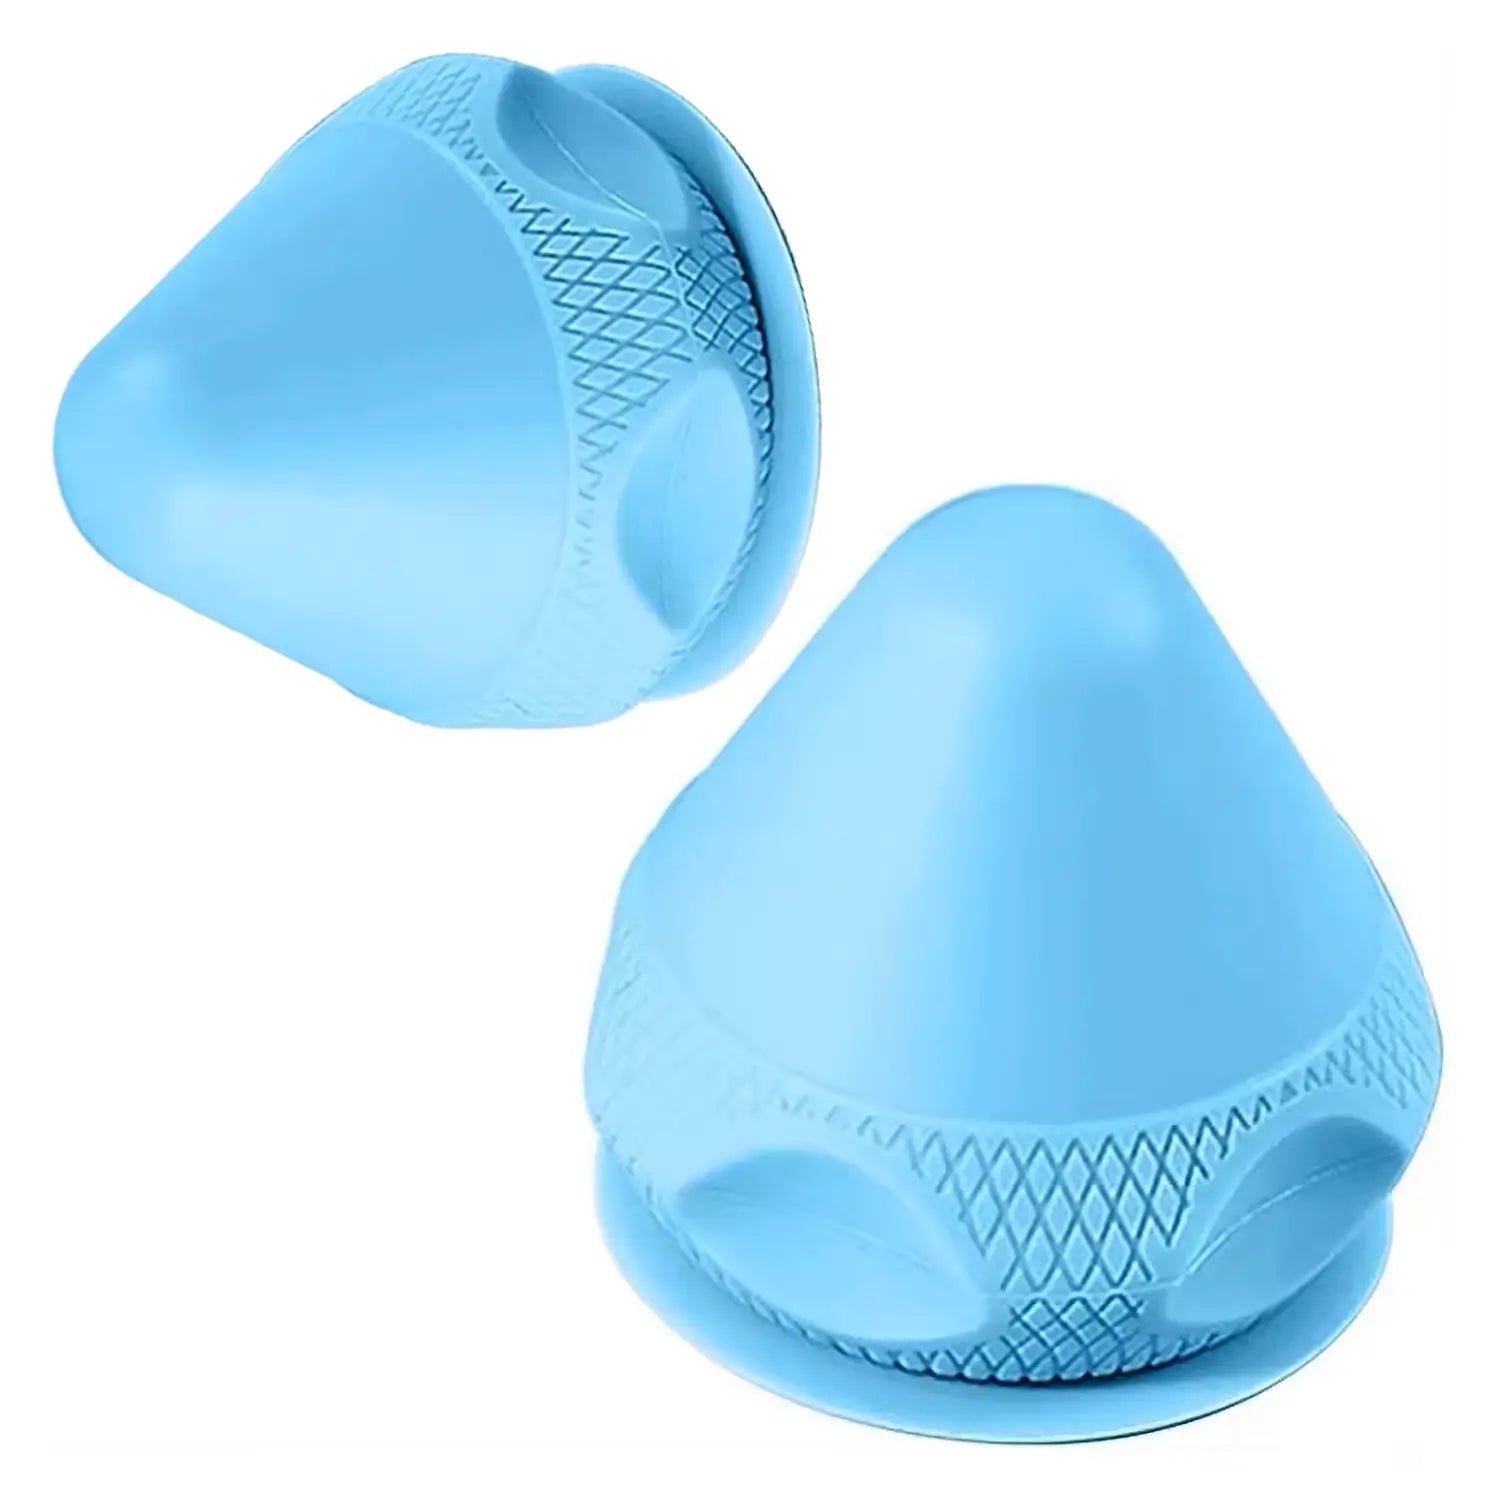 Purestep Massage Ball - For Foot Relaxation and Relieving Discomfort